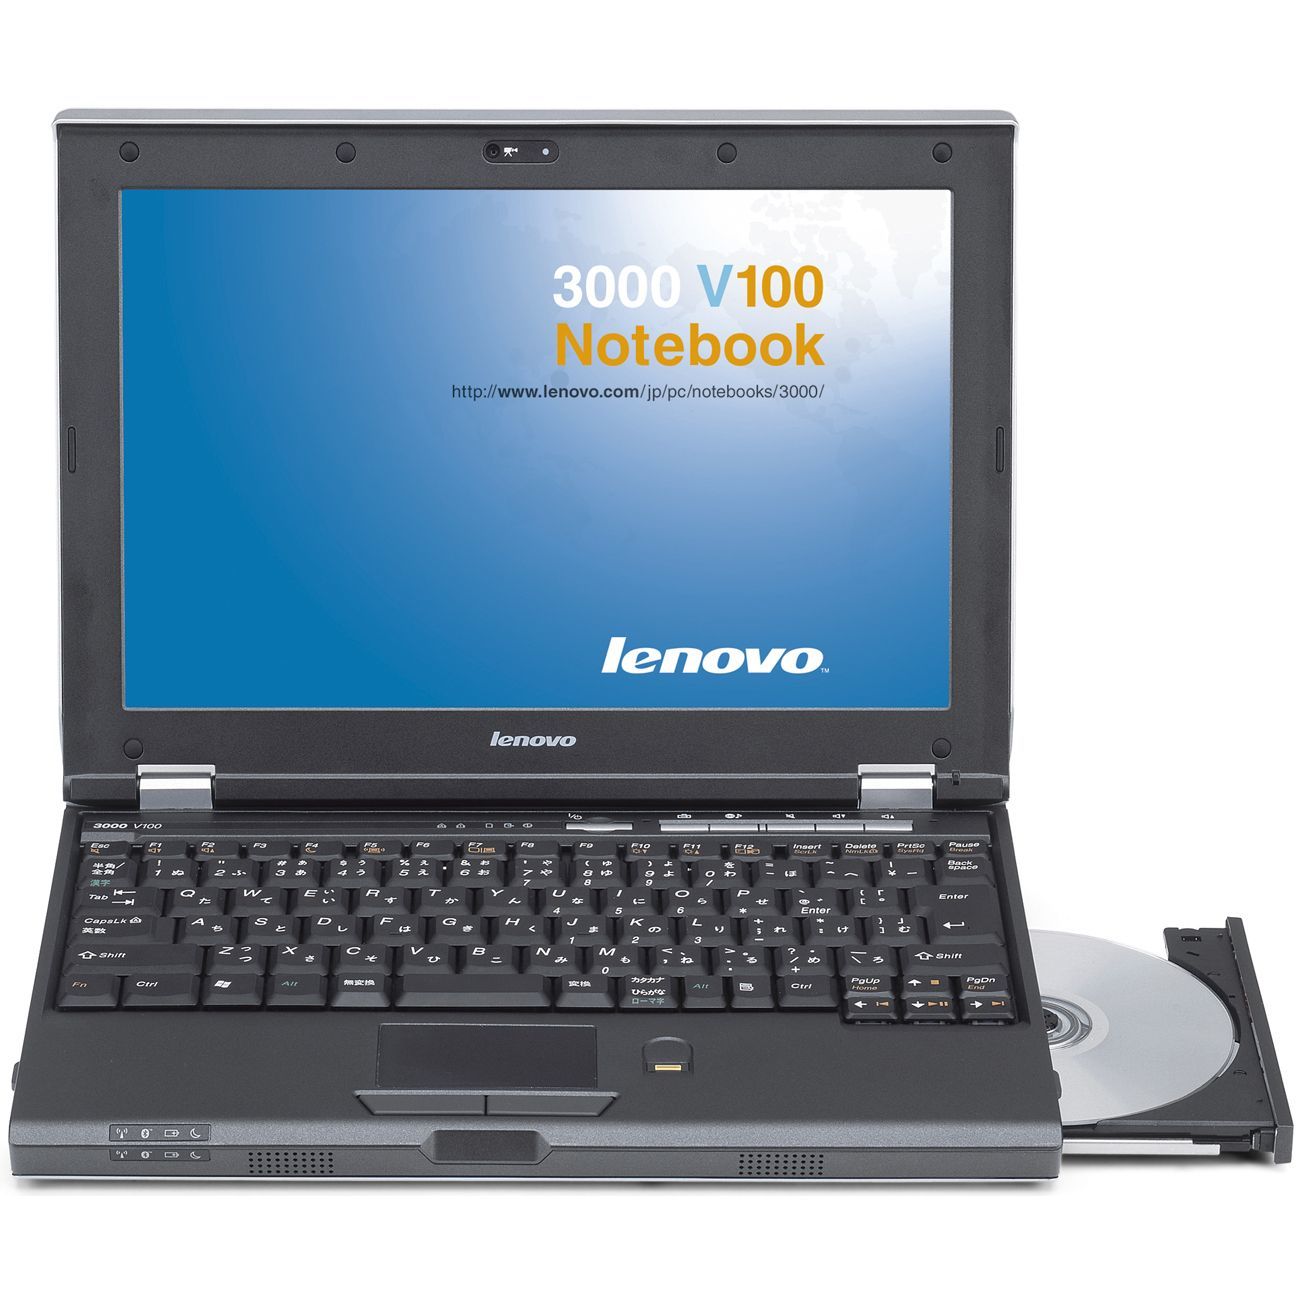 lenovo sound drivers for windows xp free download